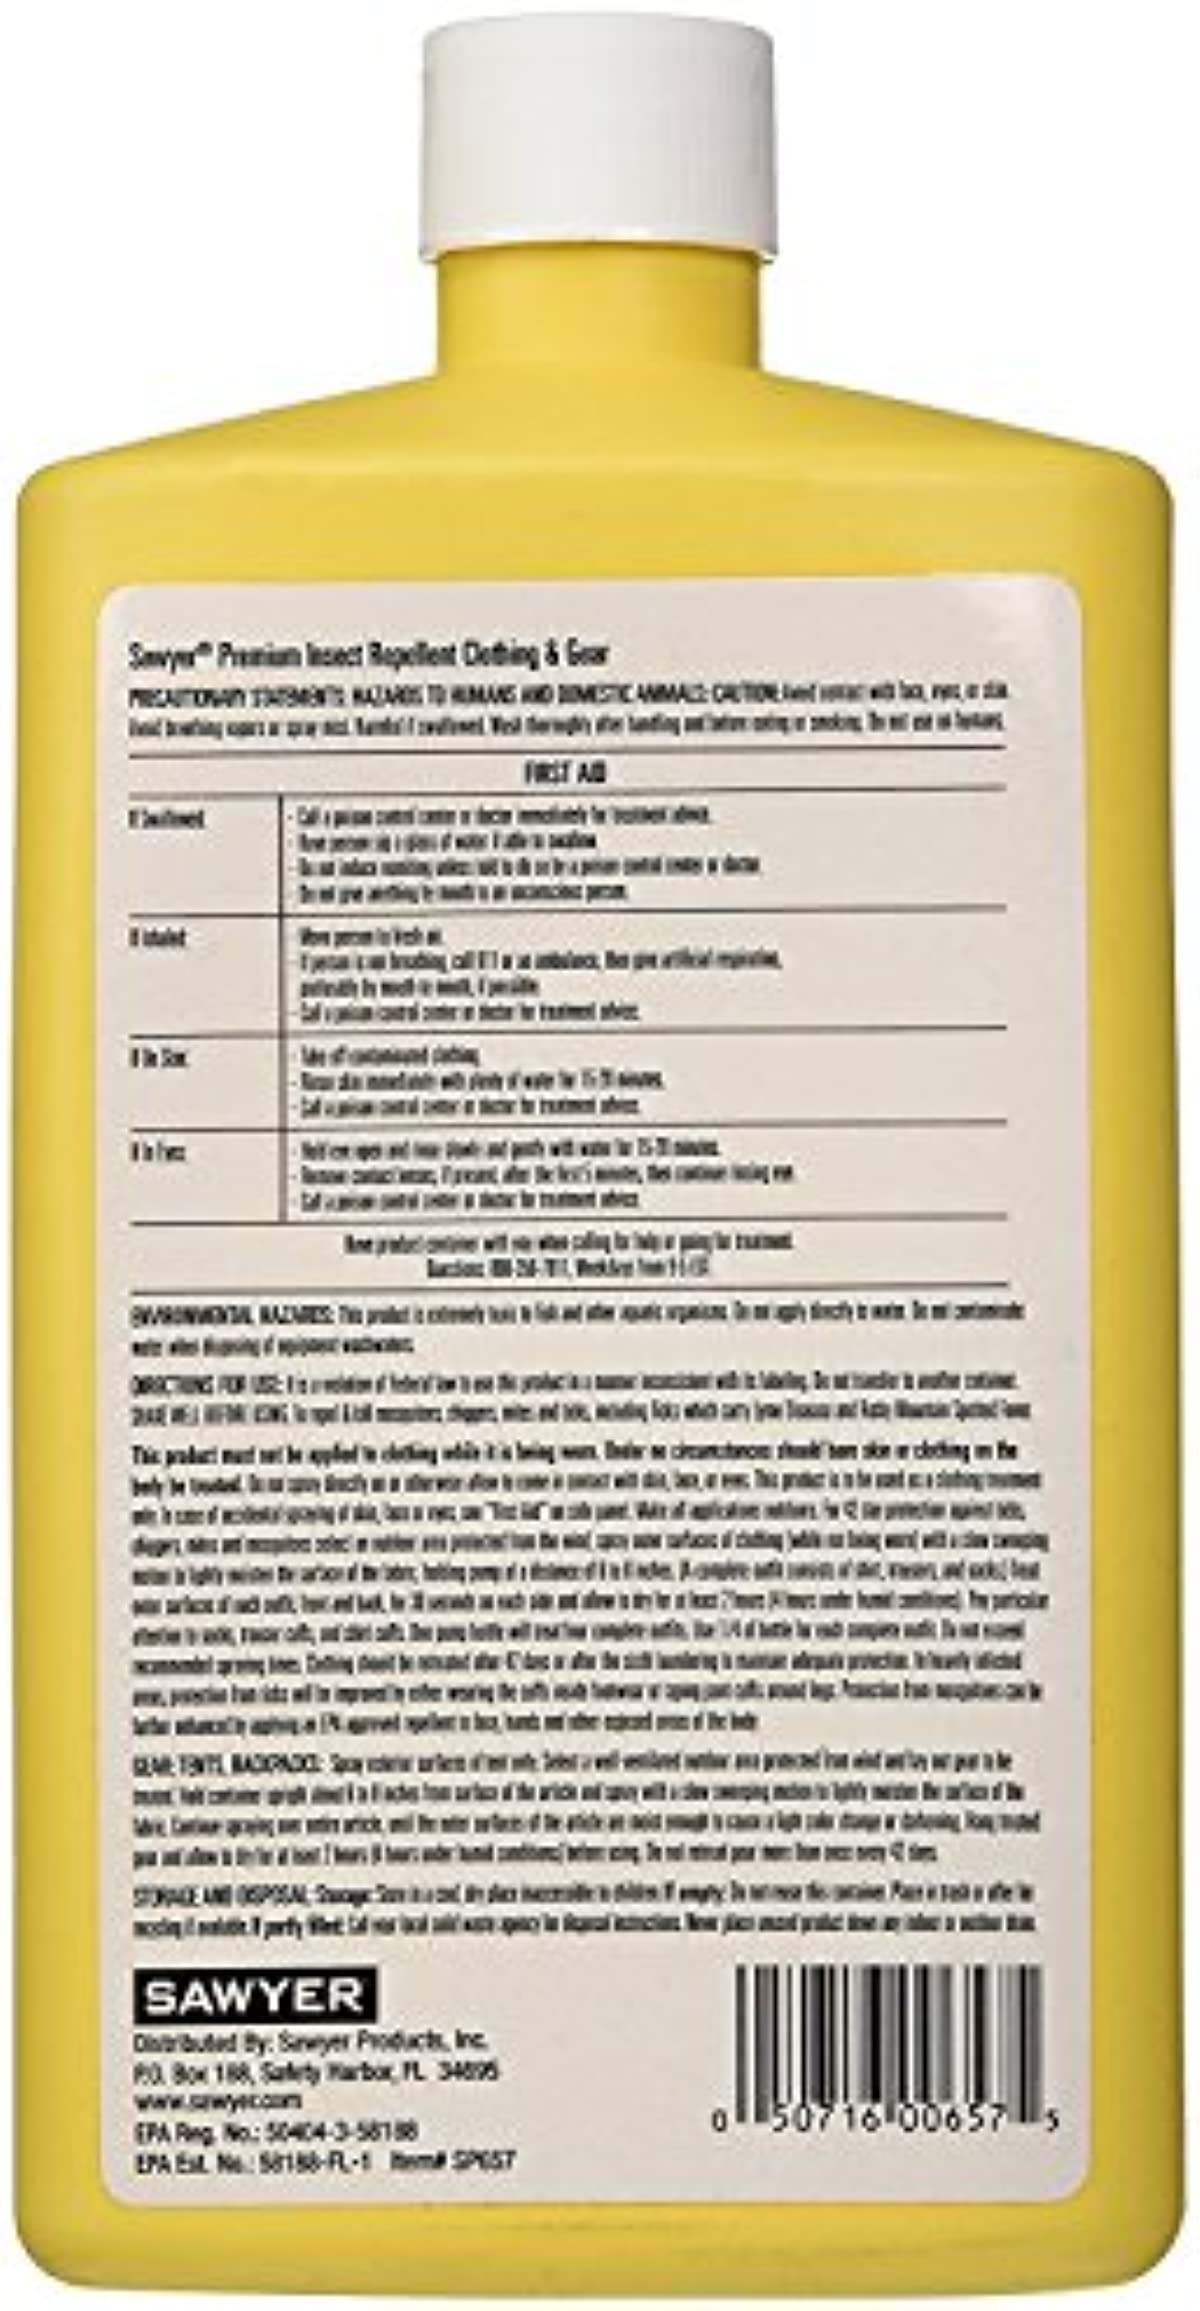 Sawyer Products Premium Permethrin Clothing Insect Repellent (24-Oz Trigger Spray) and Sawyer Products Insect Repellent w/ 20{95134240f7323190db6f35e1caa21f478f7e8ca0e9efc337d4396cae86e2615a} Picaridin (4-Oz Pump Spray) Bundle